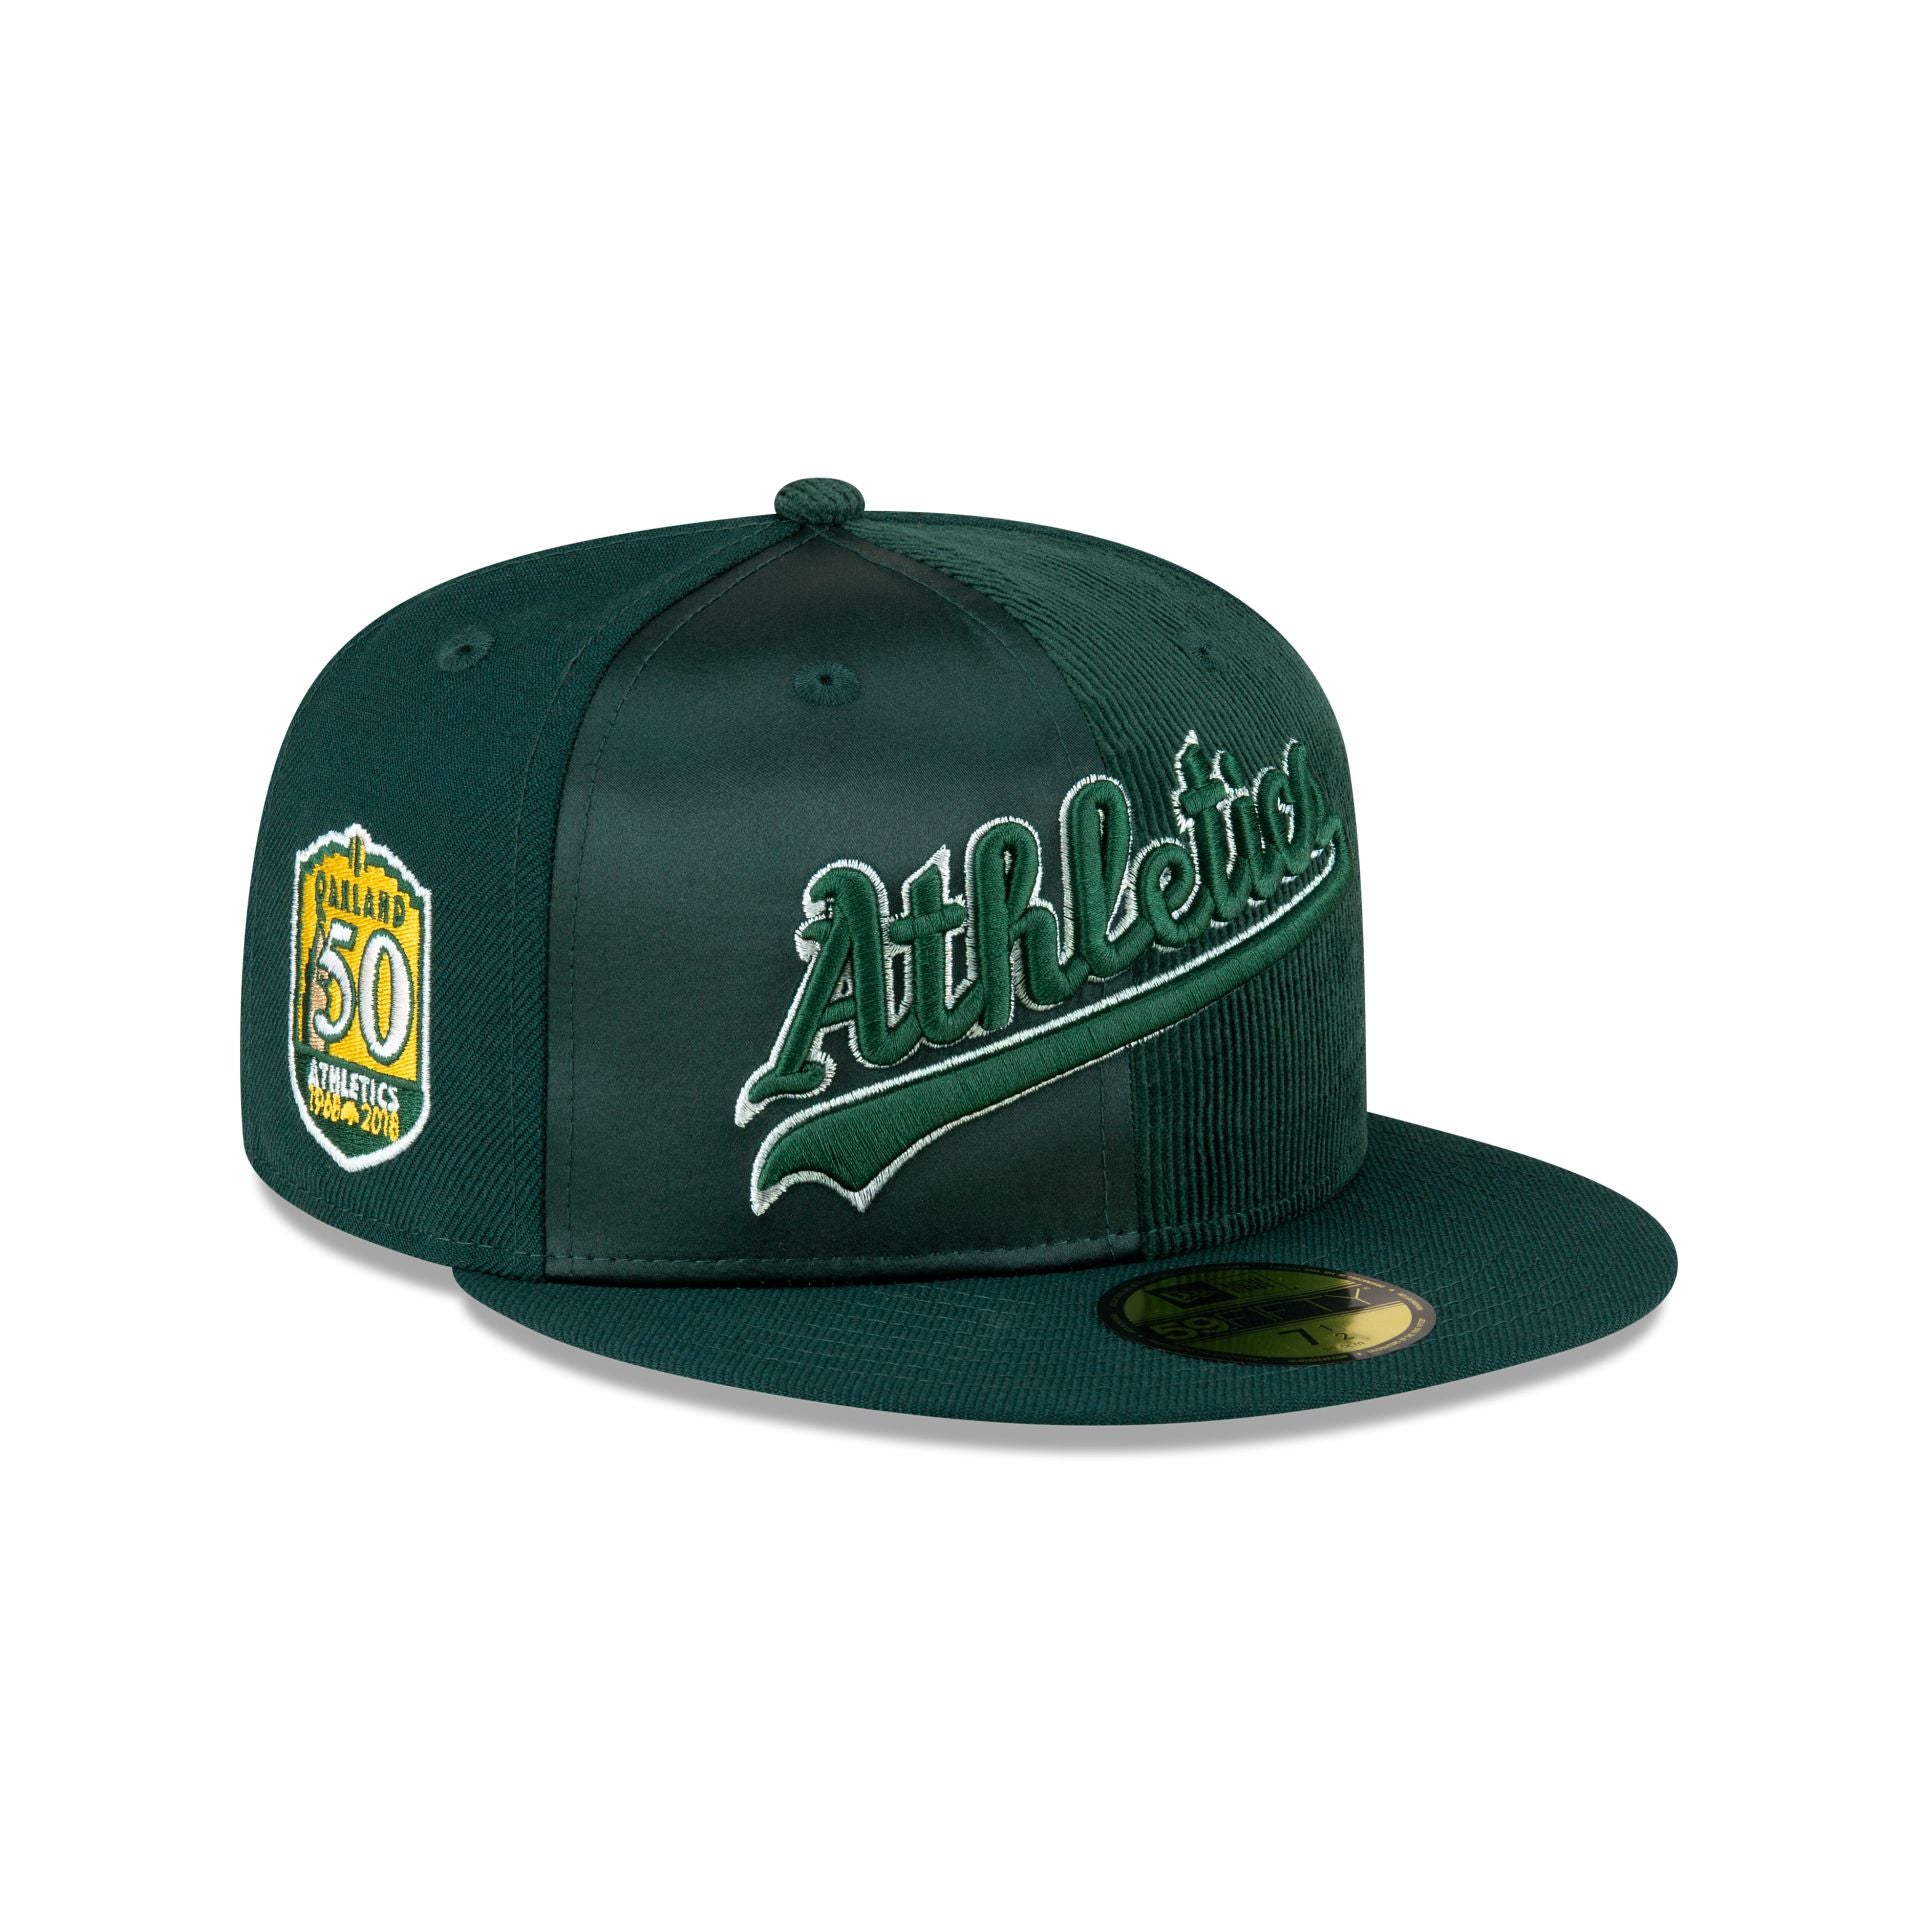 Just Caps Heathered Crown Oakland Athletics 59FIFTY Fitted Hat, Gray - Size: 7 1/4, MLB by New Era